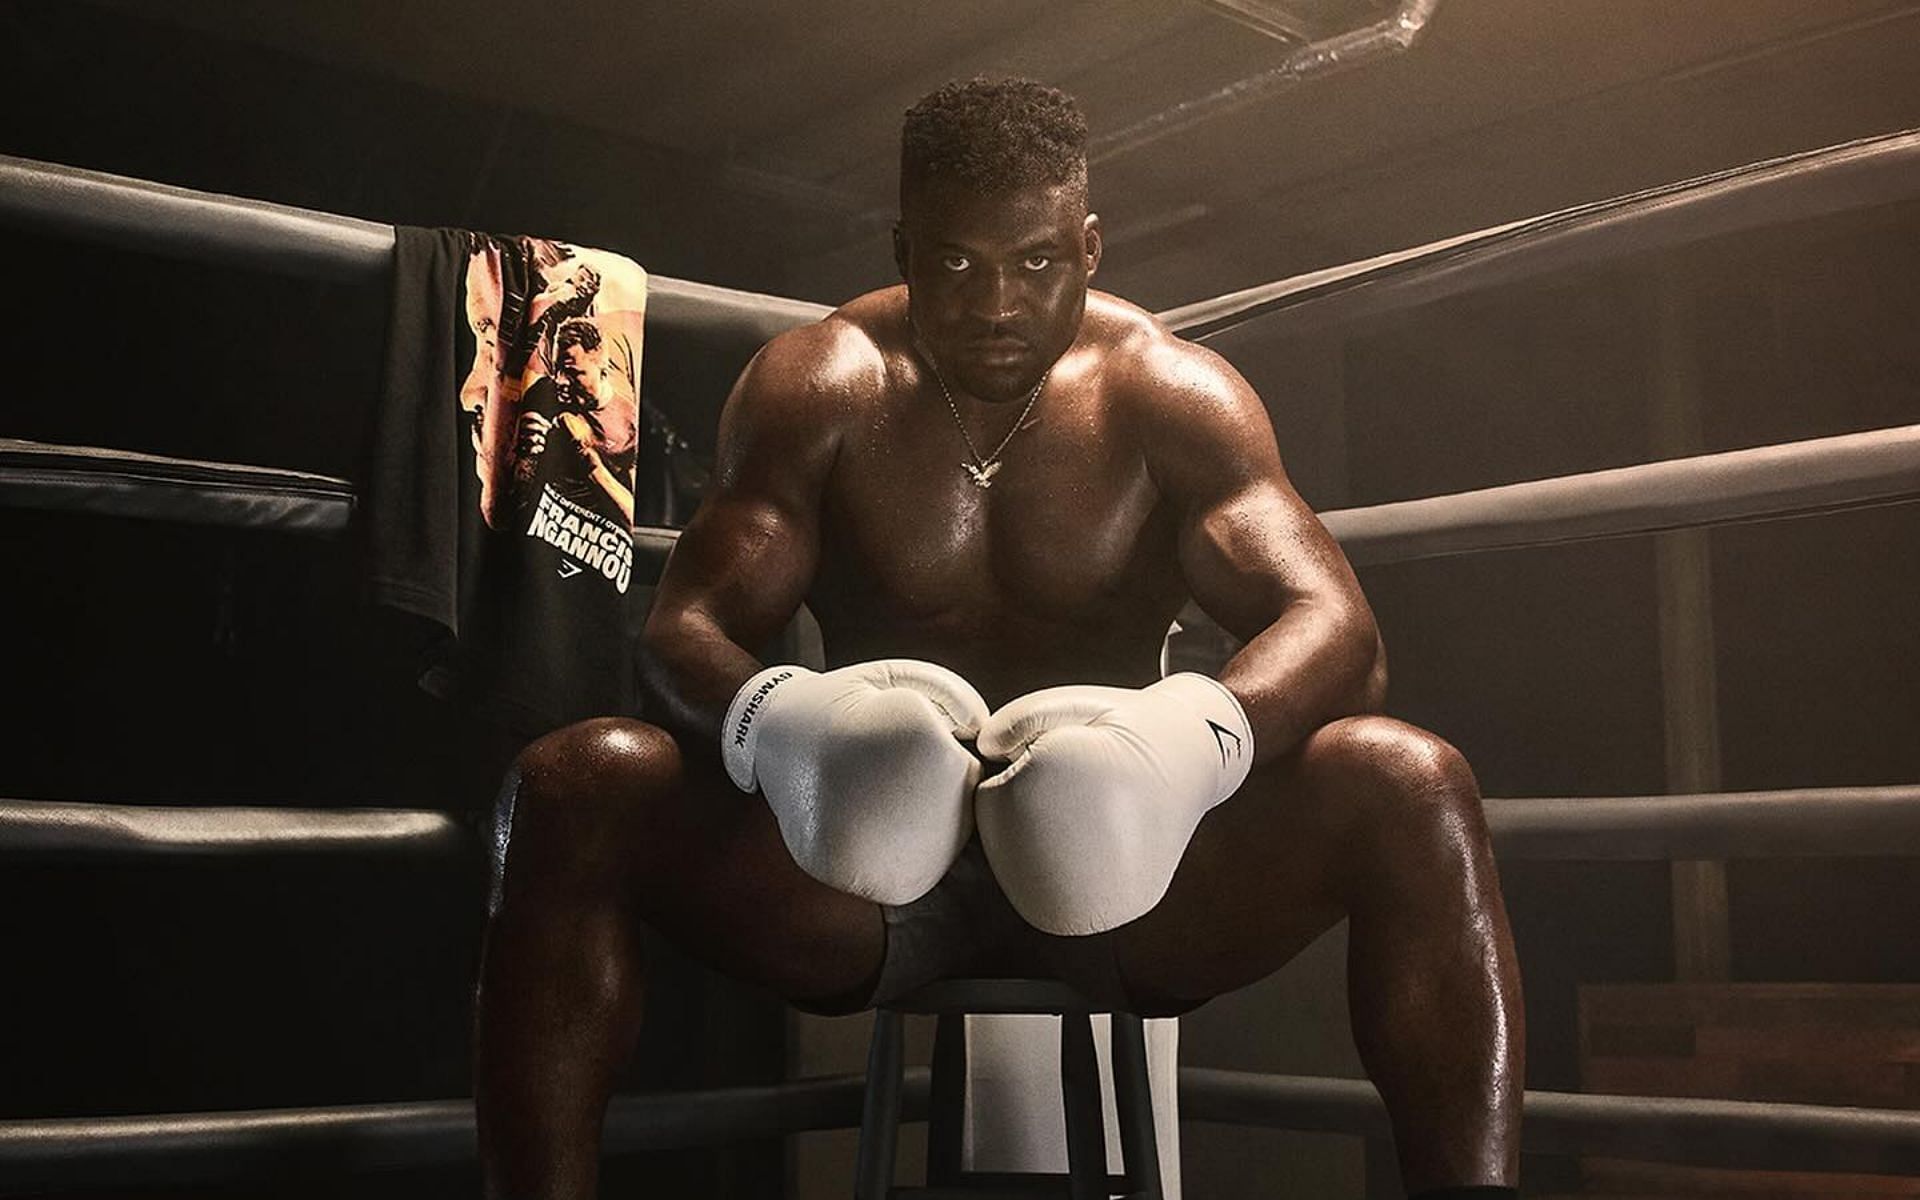 Can Francis Ngannou shock the world this weekend? [Image Credit: @francisngannou on Instagram]